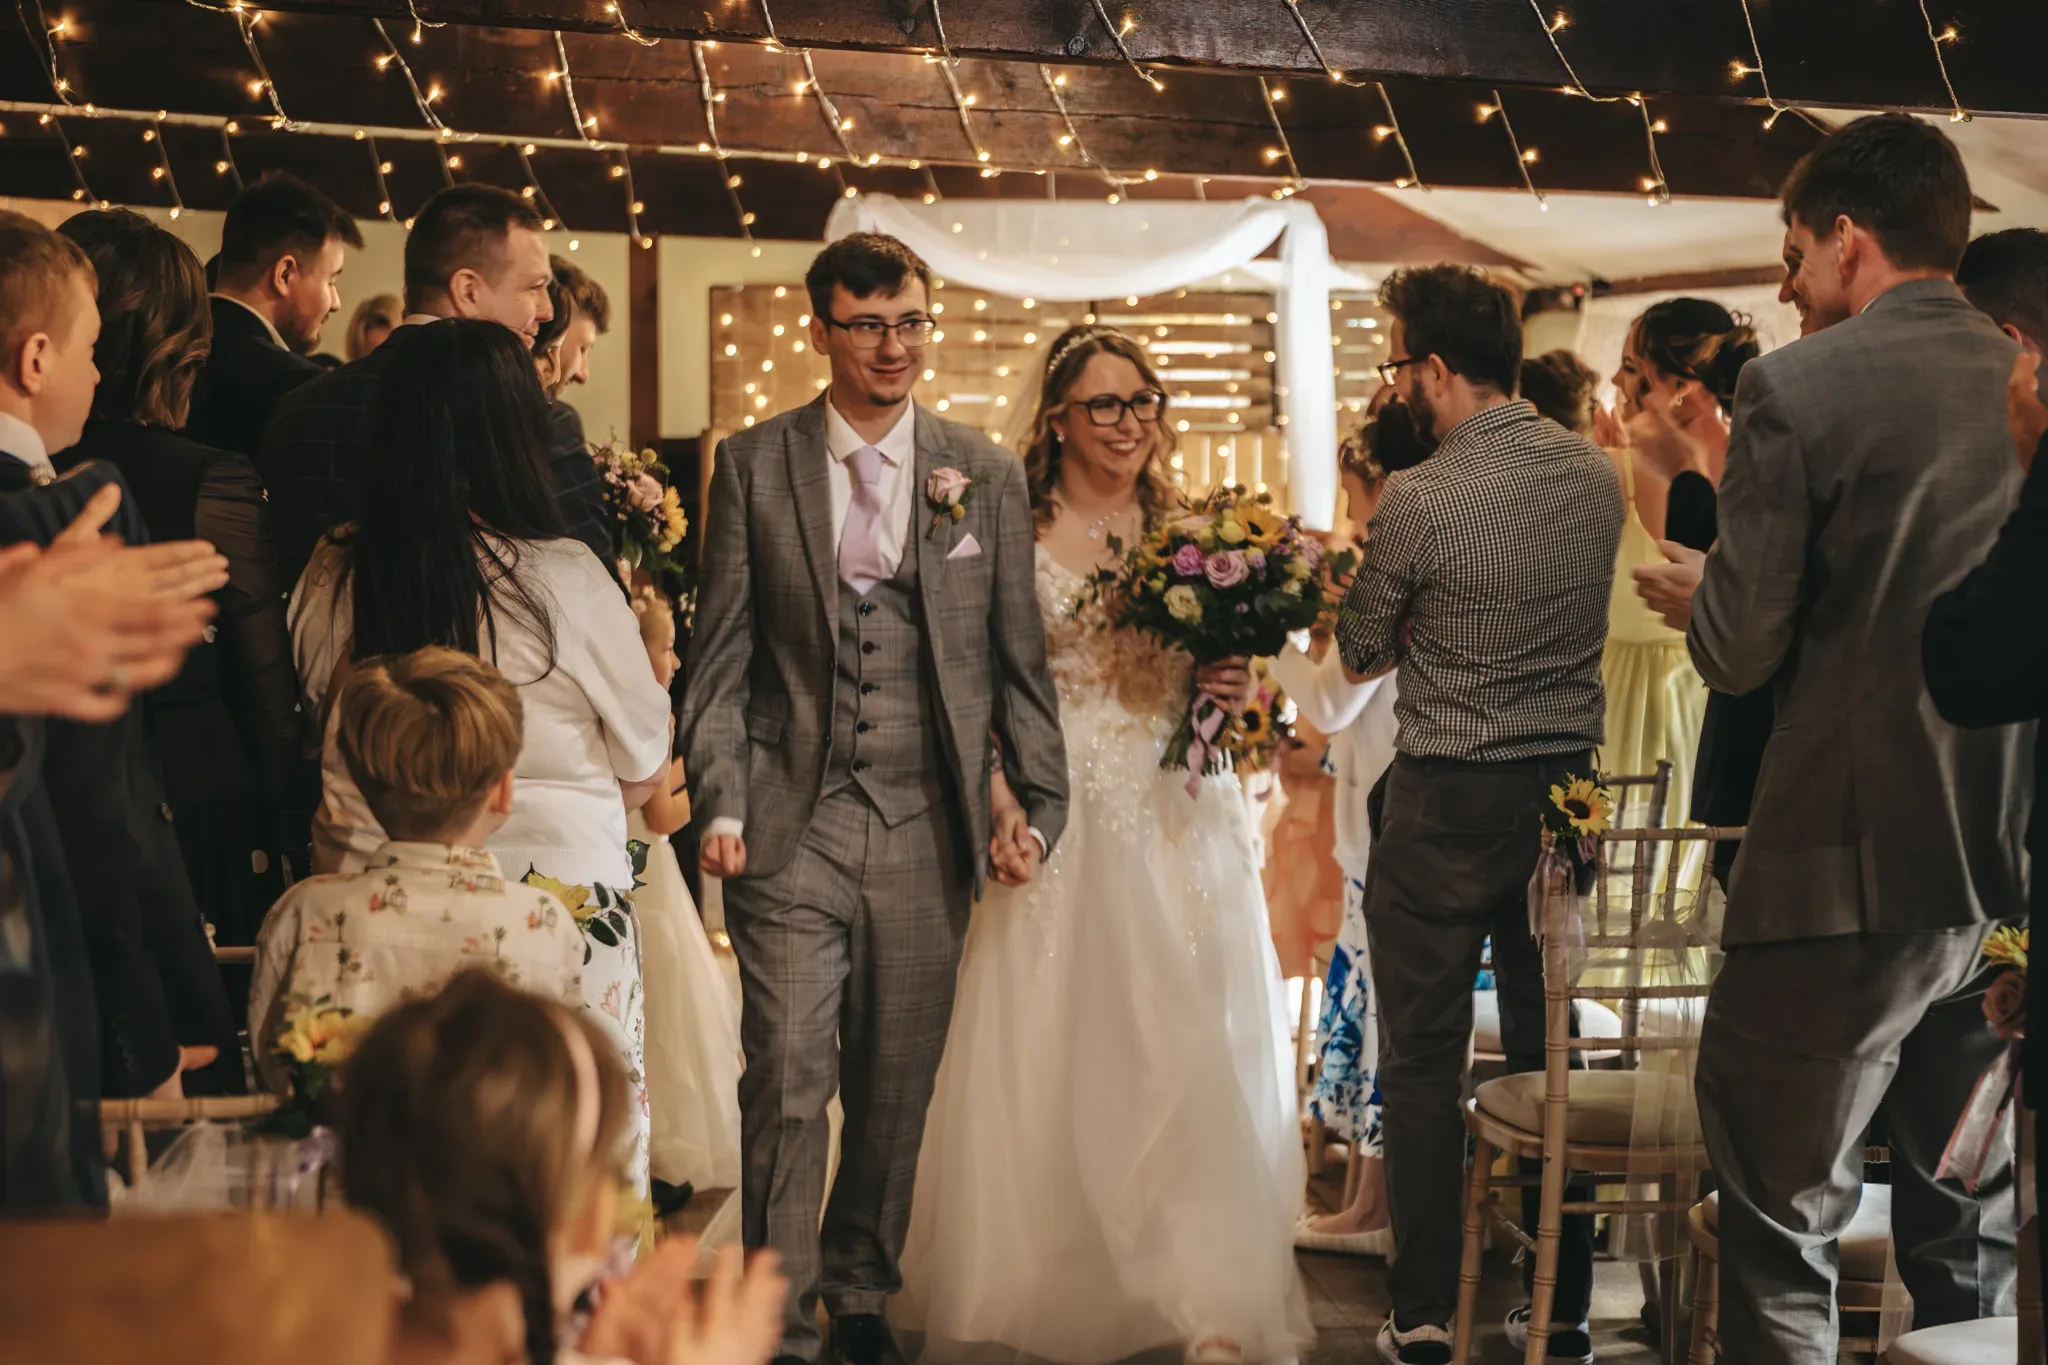 A radiant couple, the bride clutching a lush bouquet, walks joyfully down the aisle among cheering guests in a warmly lit, rustic venue adorned with string lights, marking their first steps as newlyweds.